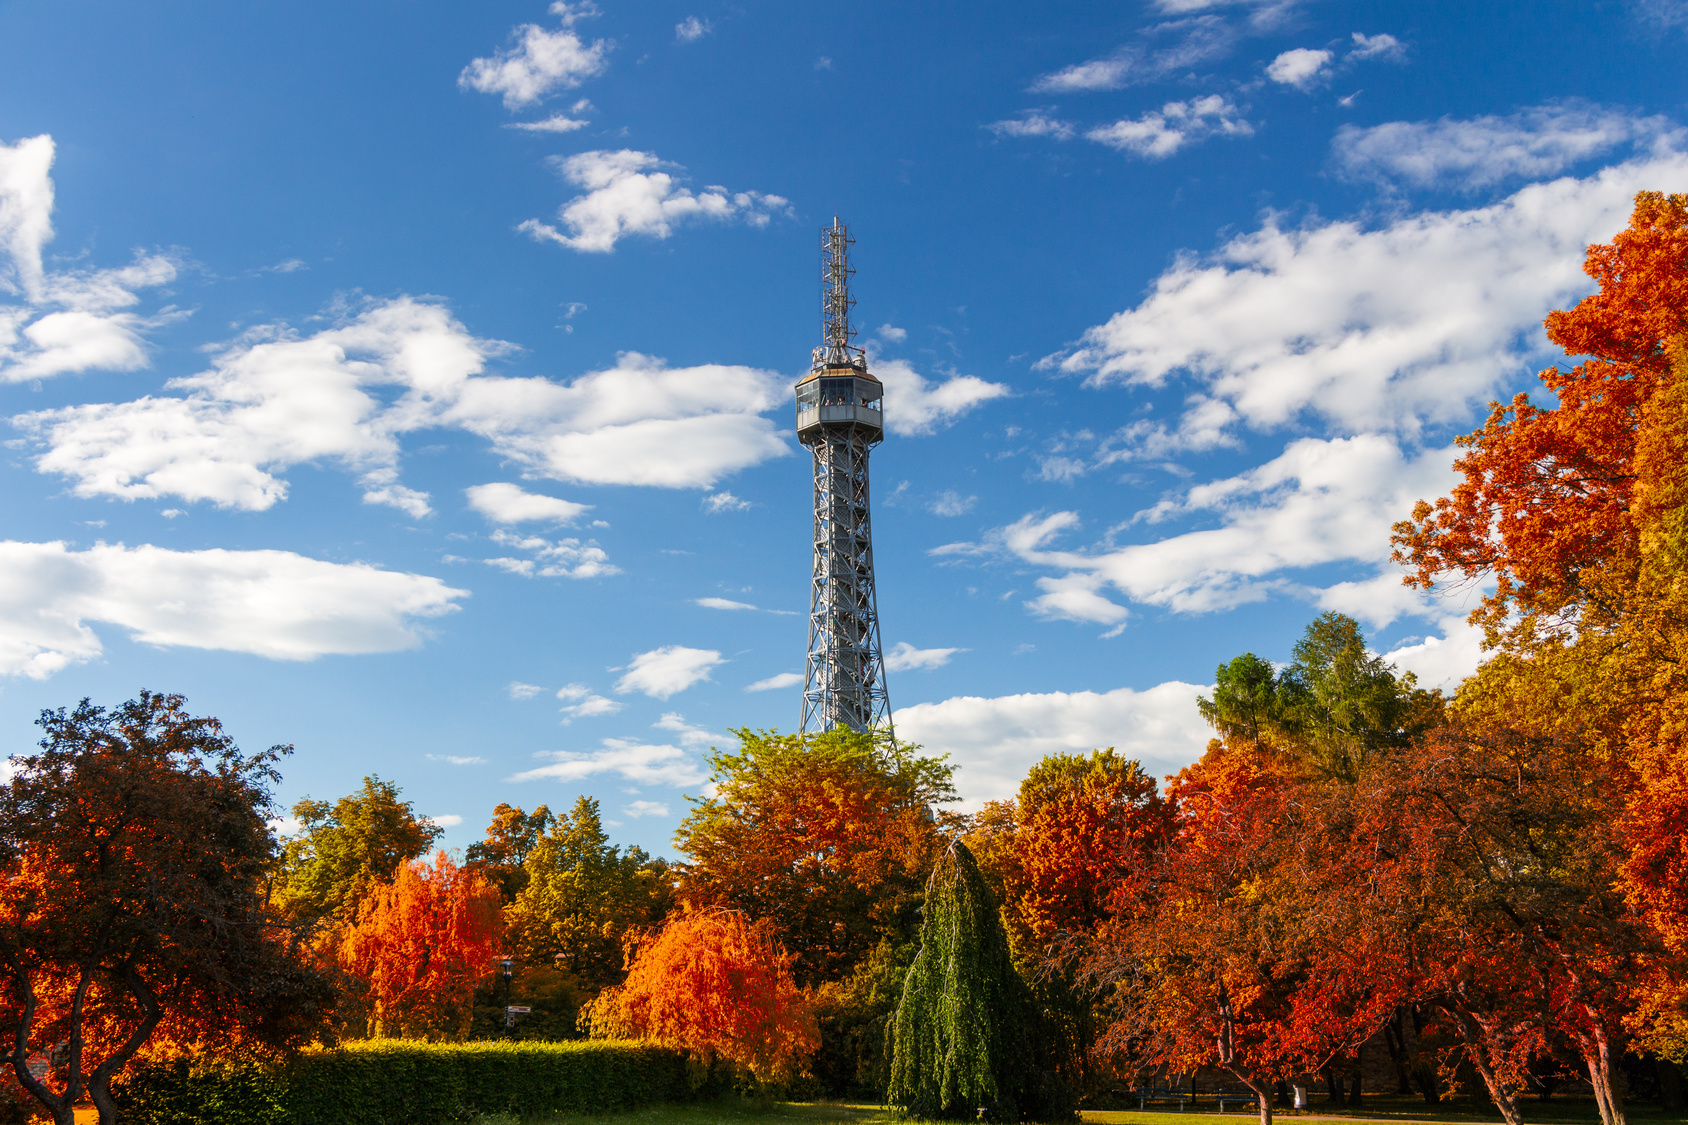 The Petrin observation and communication tower in Prague with red foliage, Czech Republic